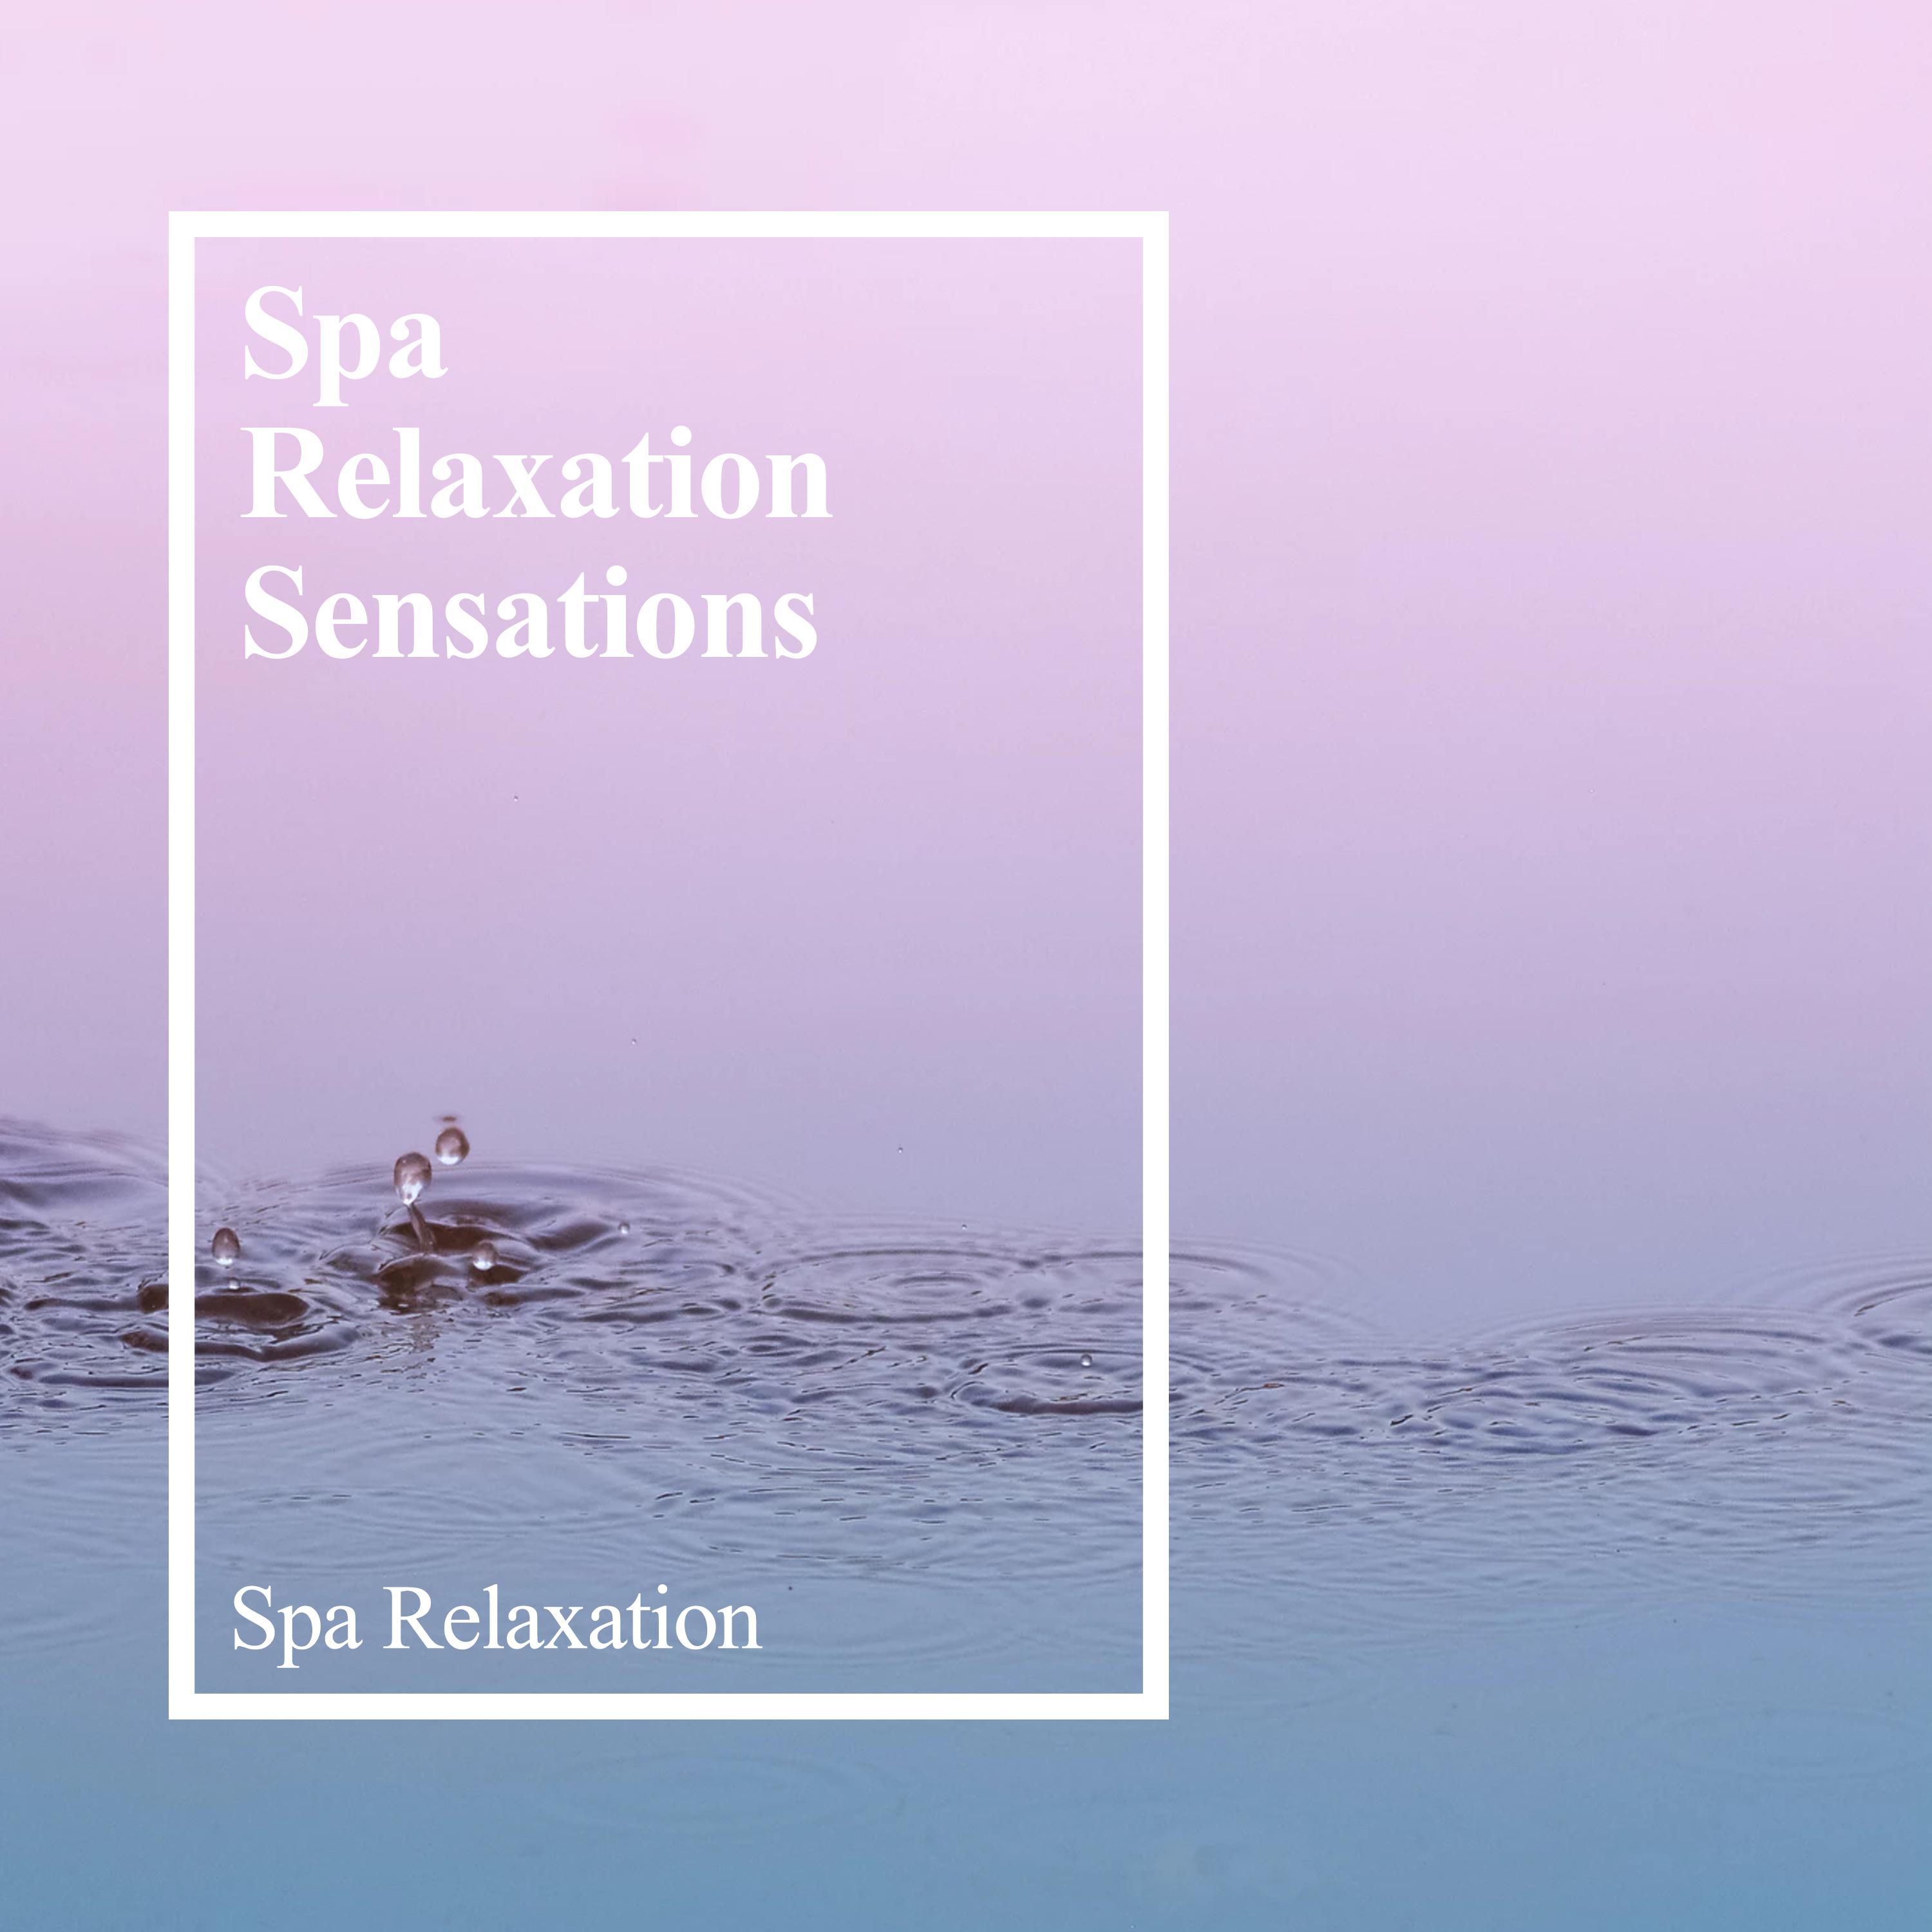 Spa Relaxation Sensations